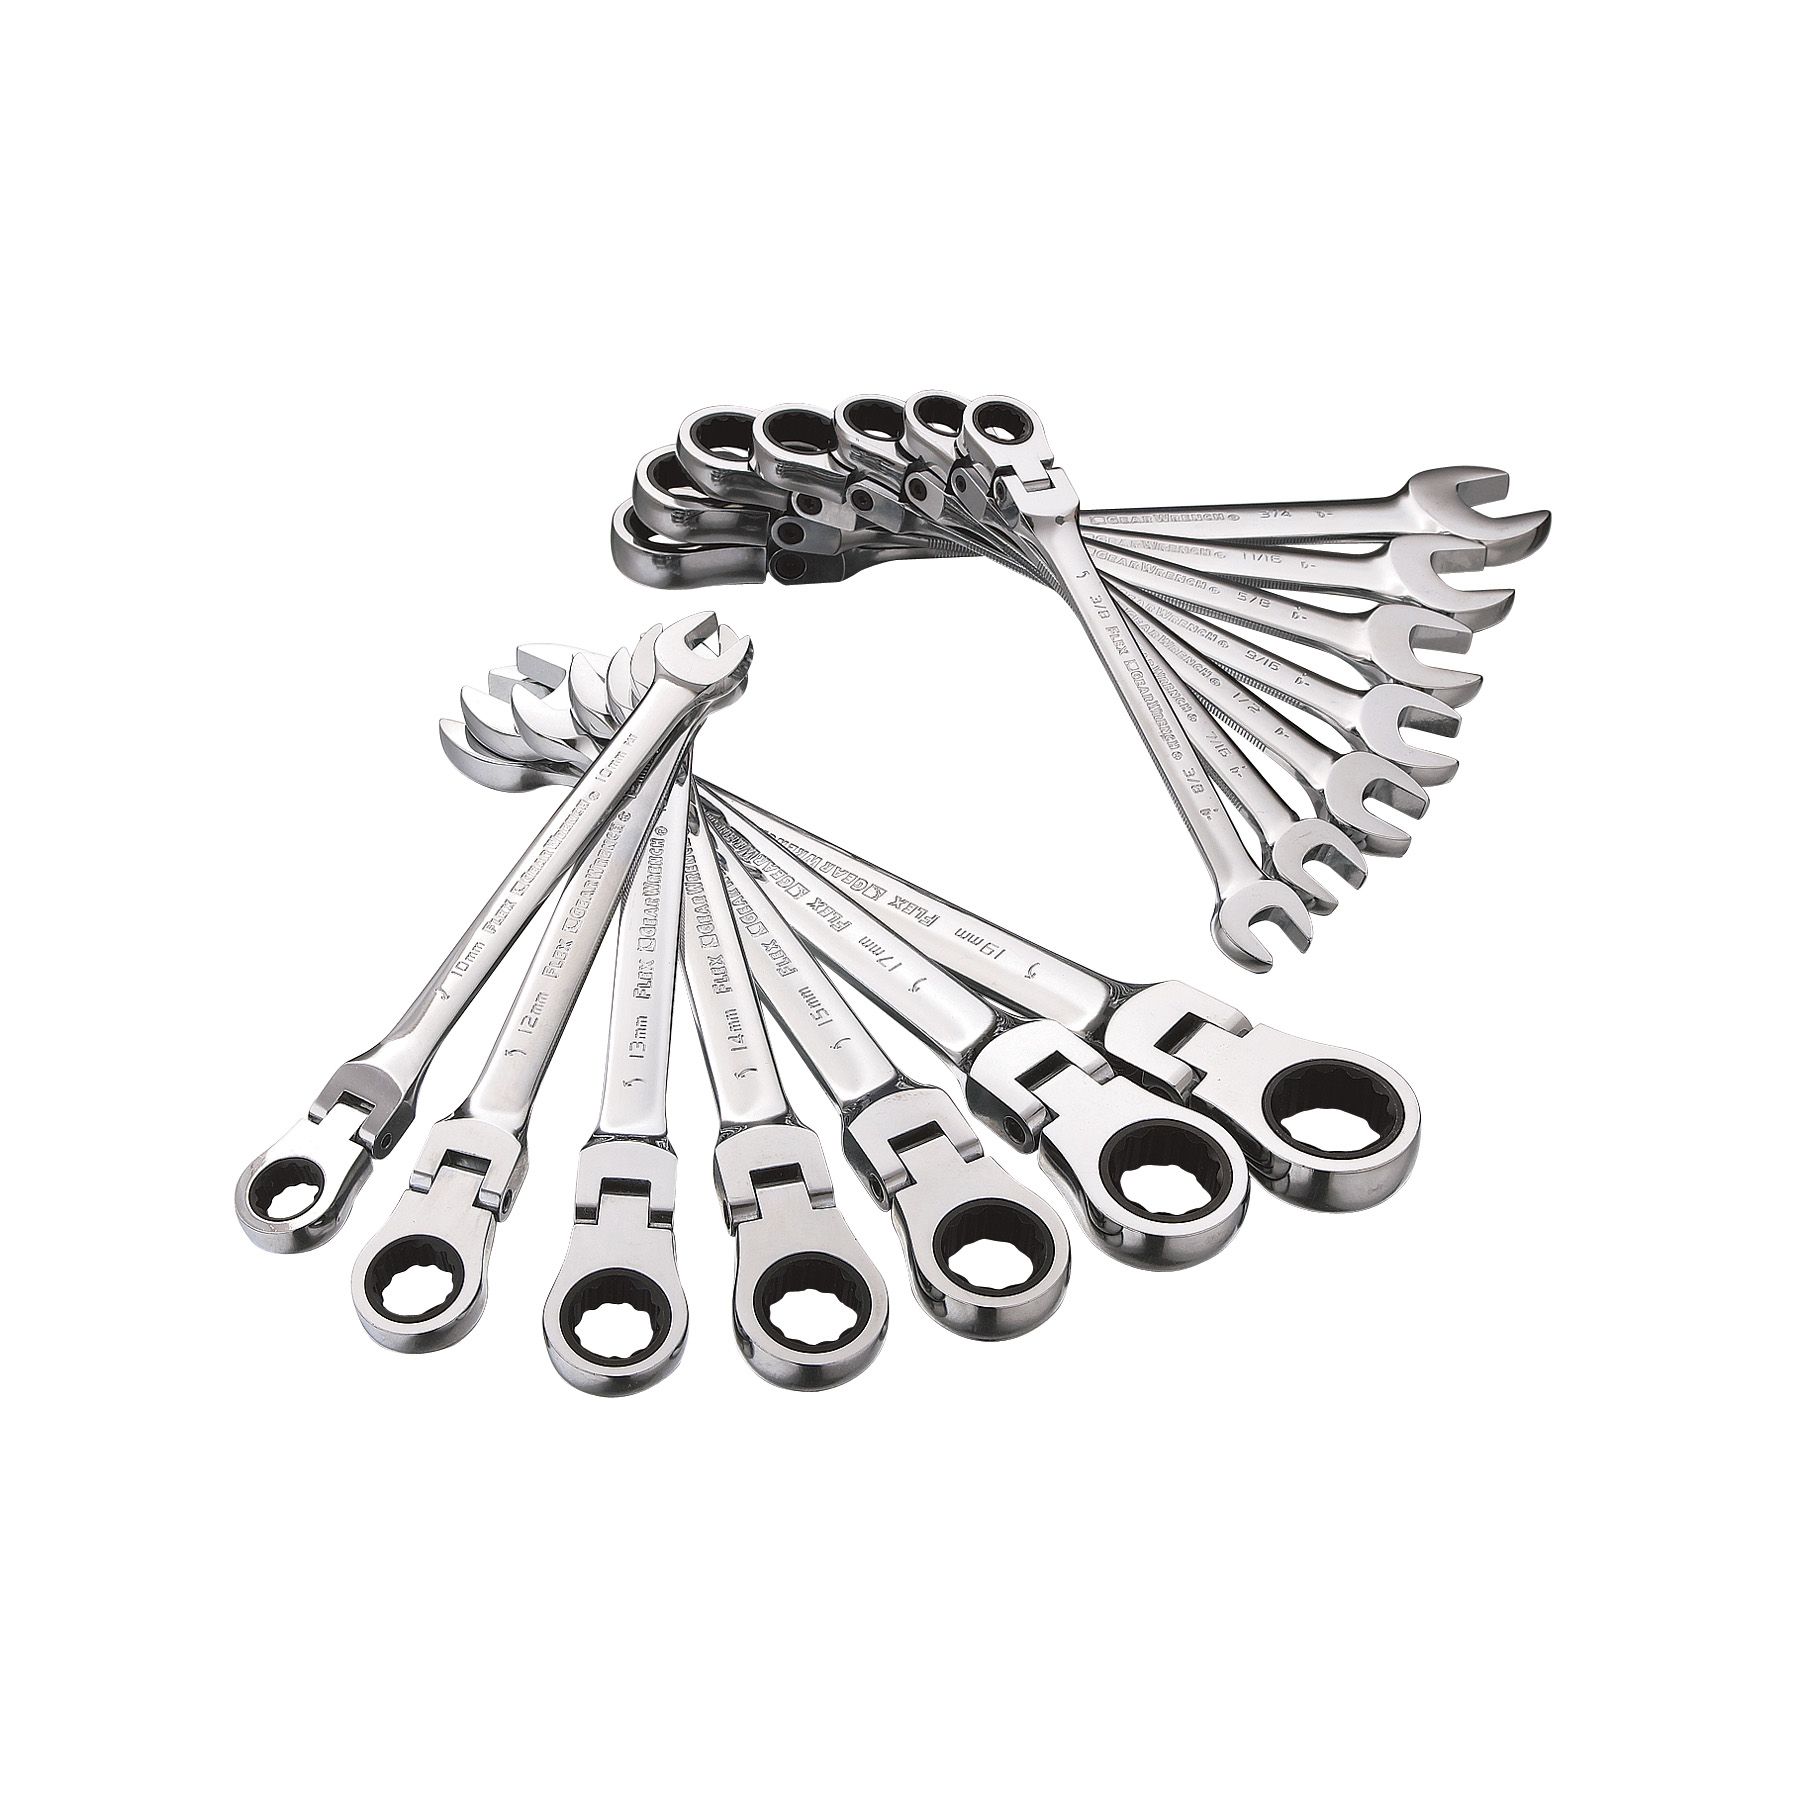 GearWrench Fully-Polished 14 pc. Flex Ratcheting Combination Wrench Set